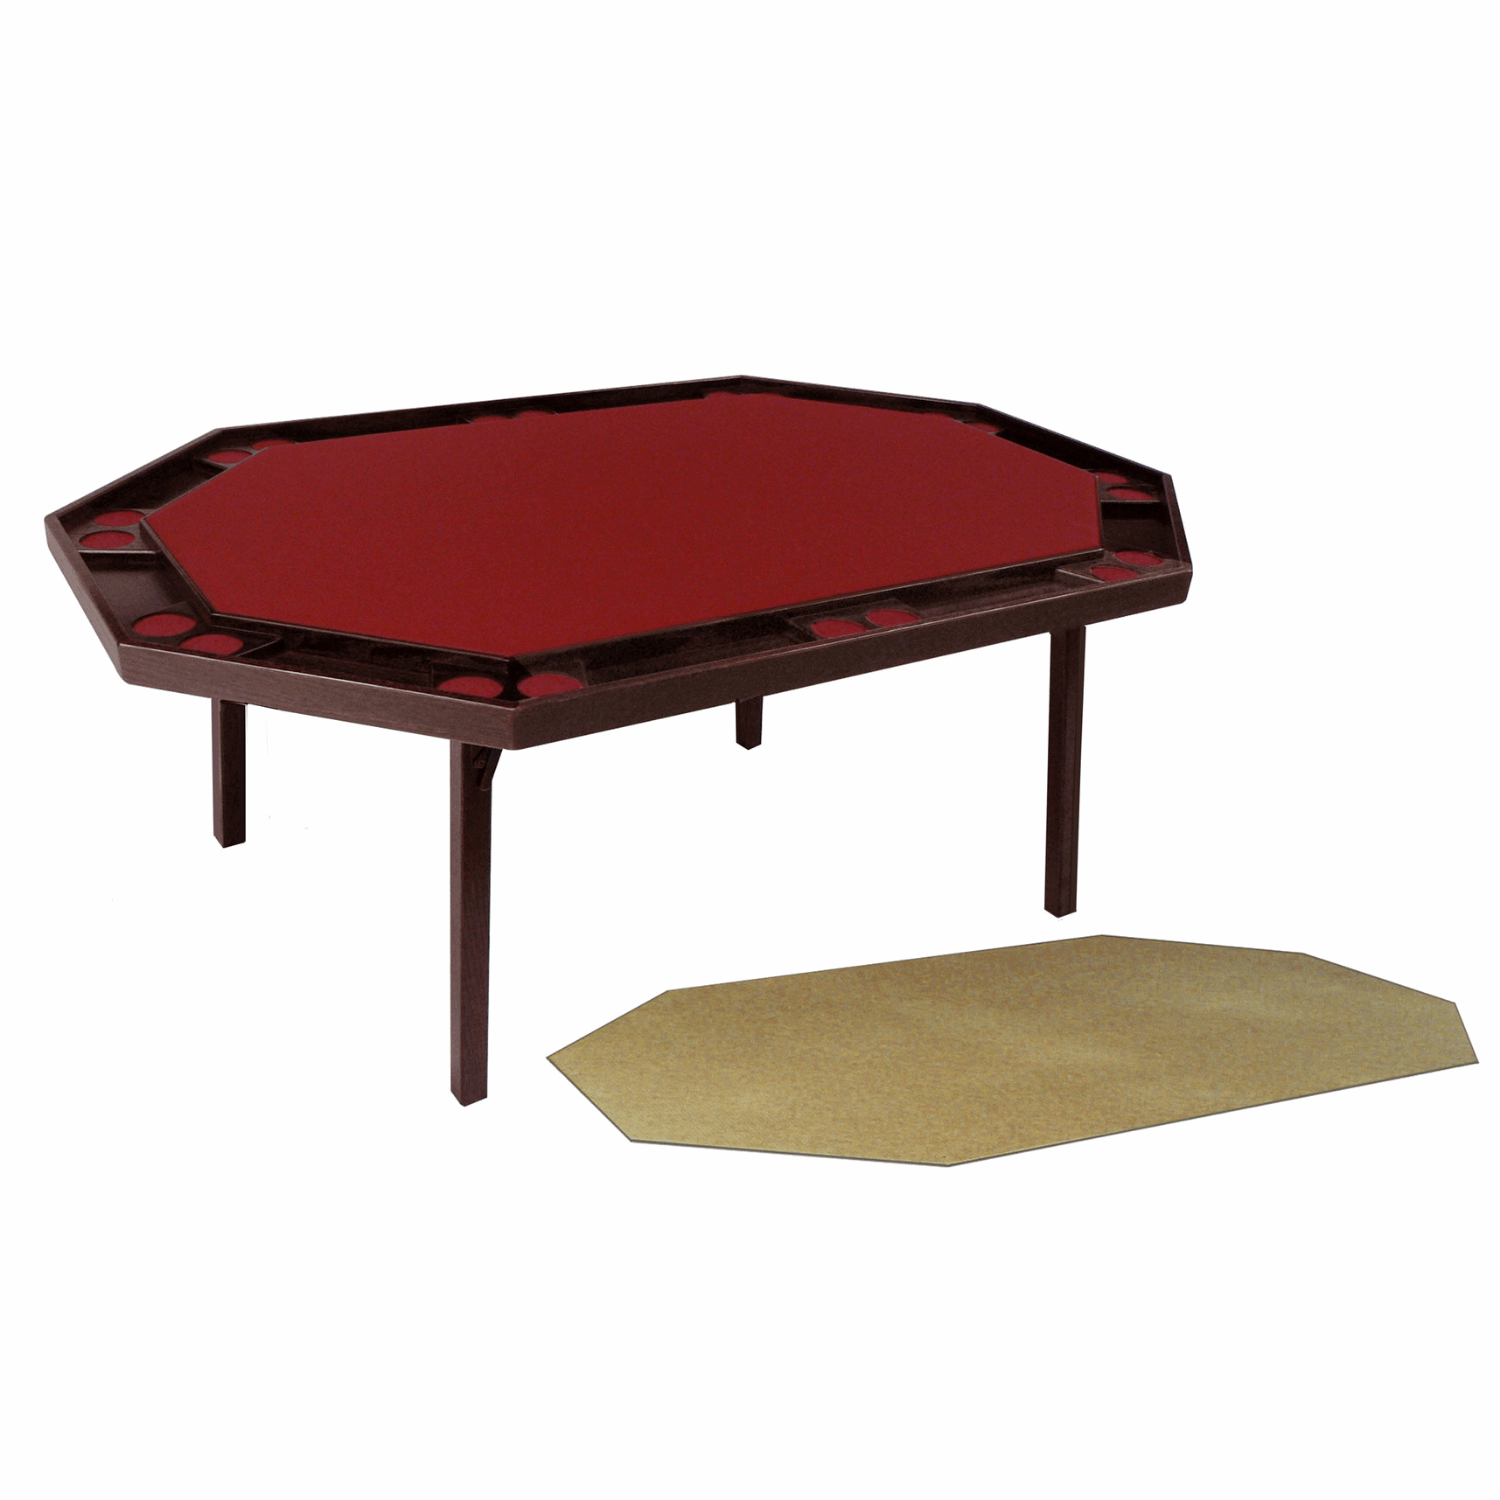 Kestell 10 Player 72" Deluxe Folding Game Table - Maple